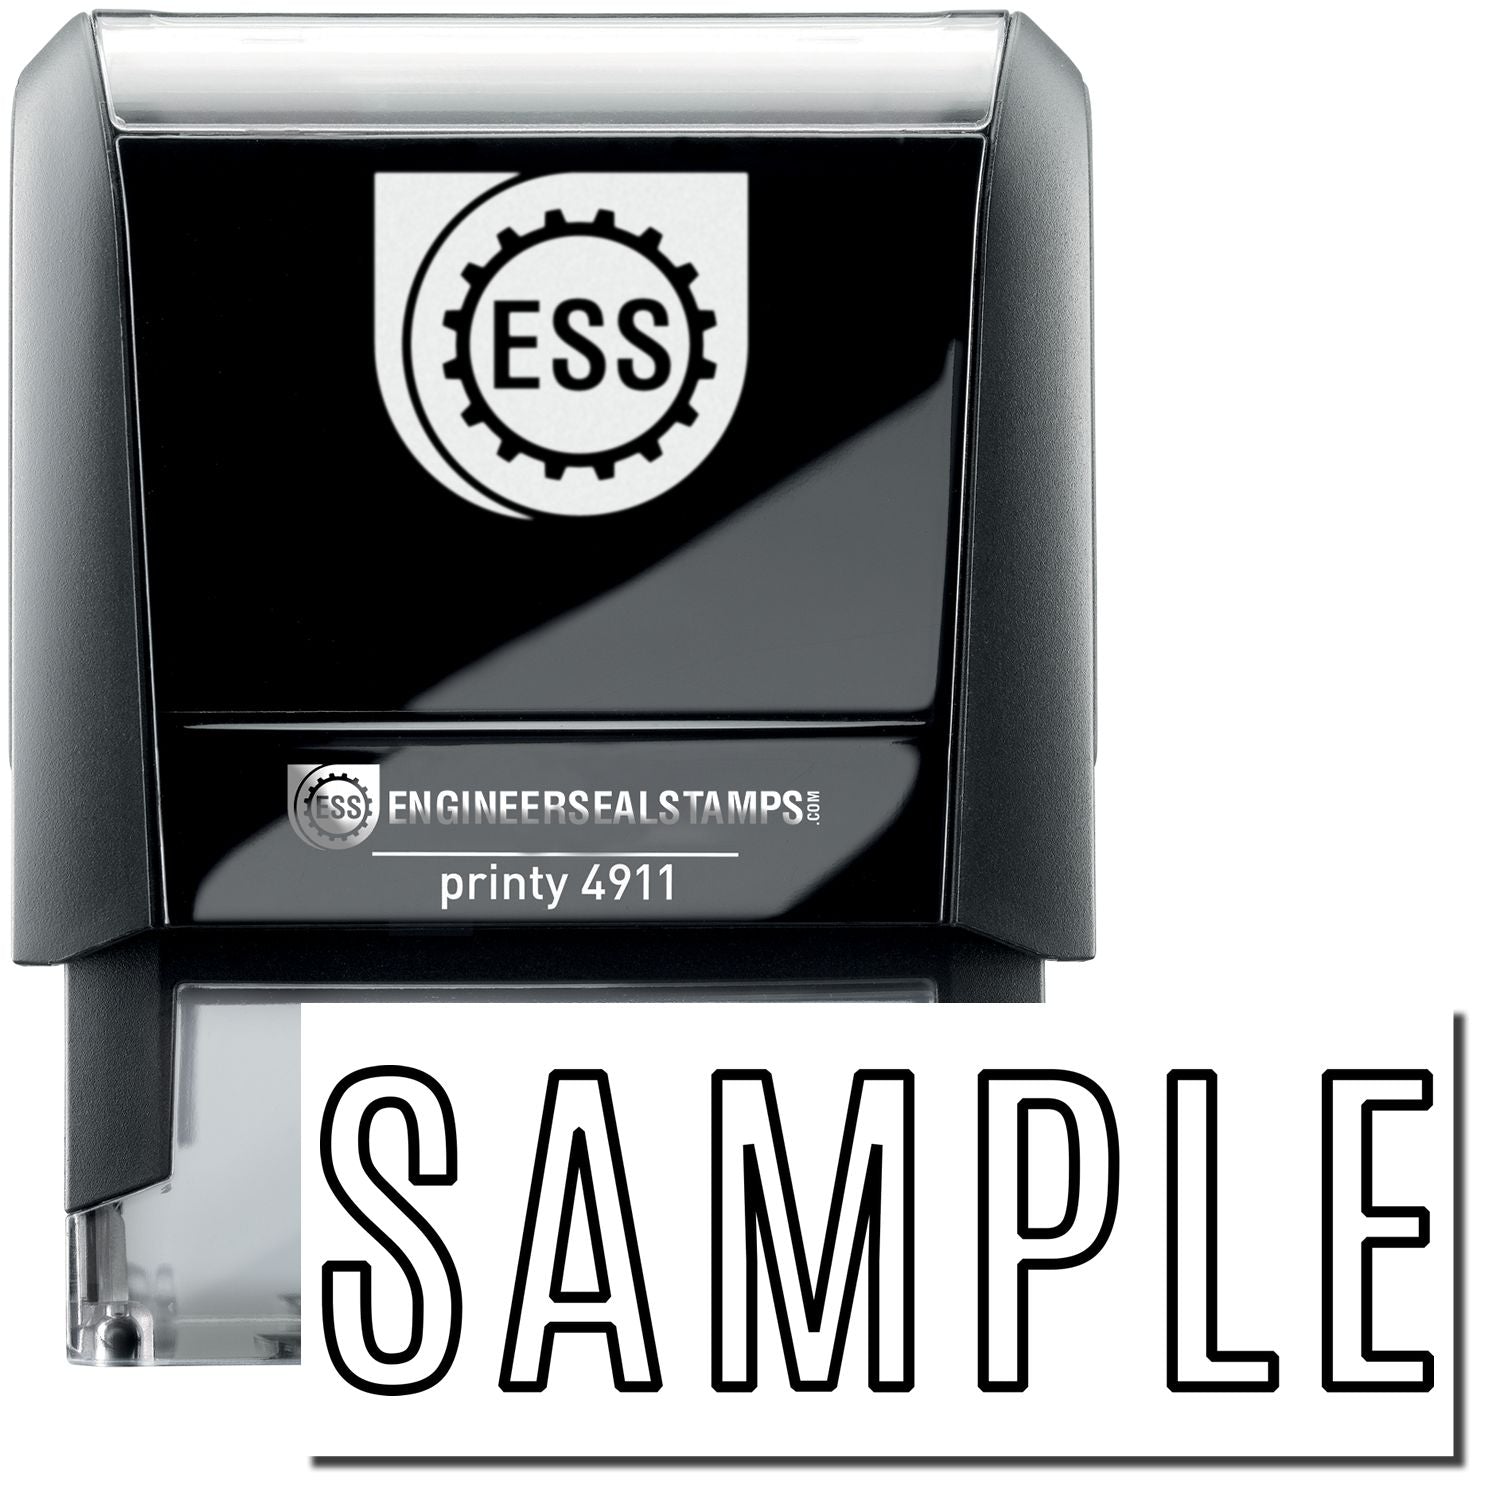 A self-inking stamp with a stamped image showing how the text "SAMPLE" in an outline style is displayed after stamping.